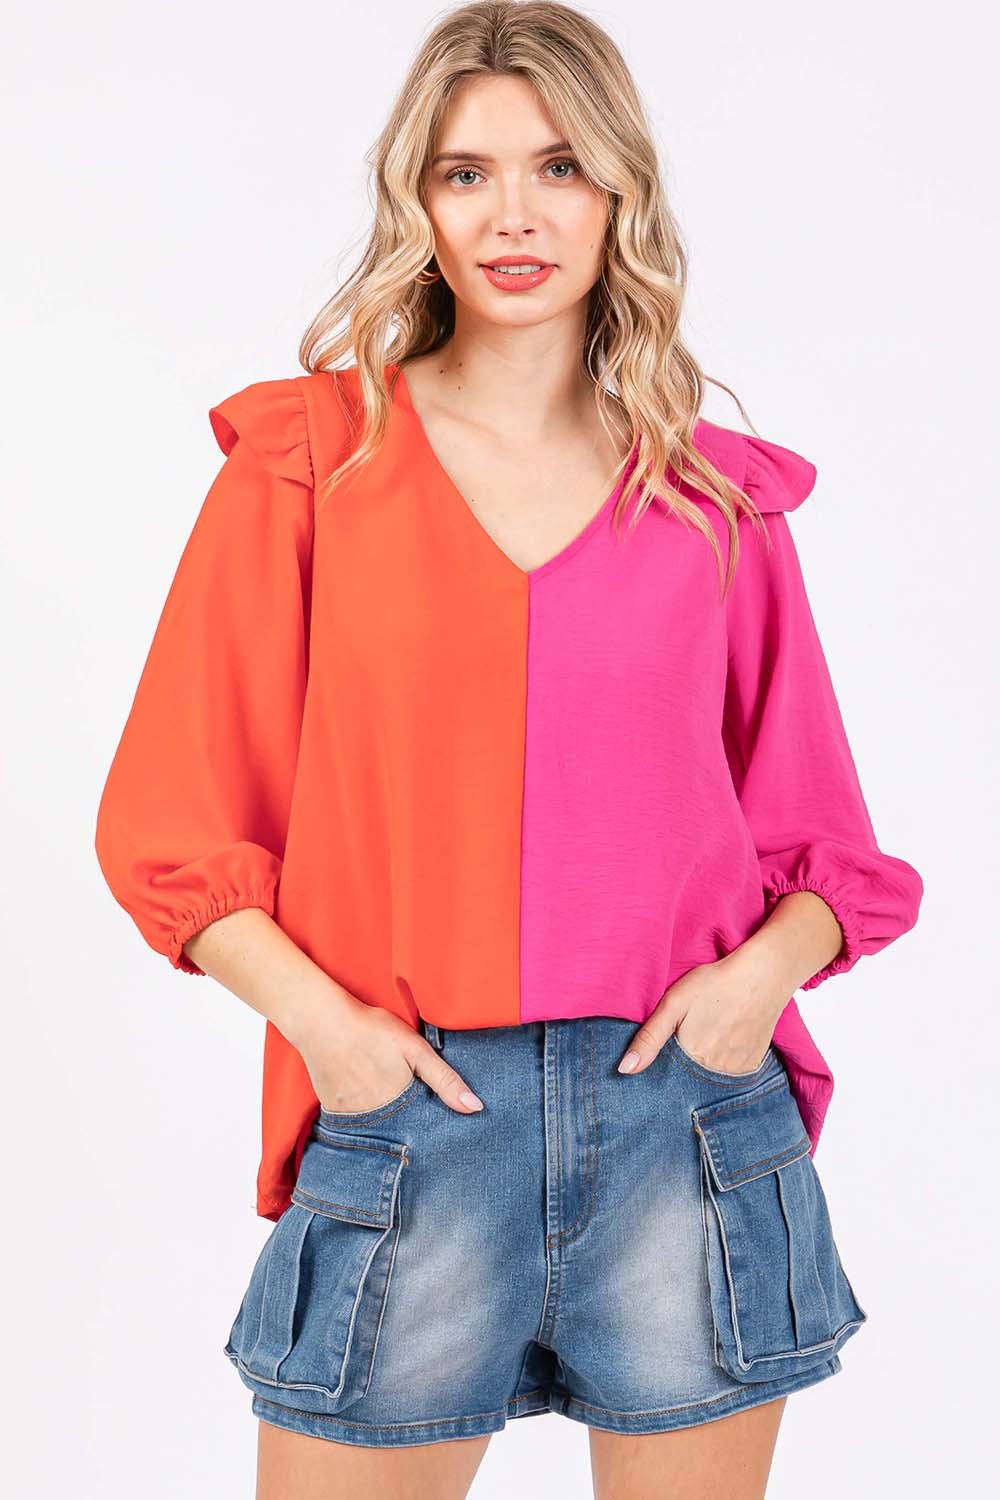 GeeGee Full Size Ruffle Trim Contrast Blouse-Long Sleeve Tops-Inspired by Justeen-Women's Clothing Boutique in Chicago, Illinois